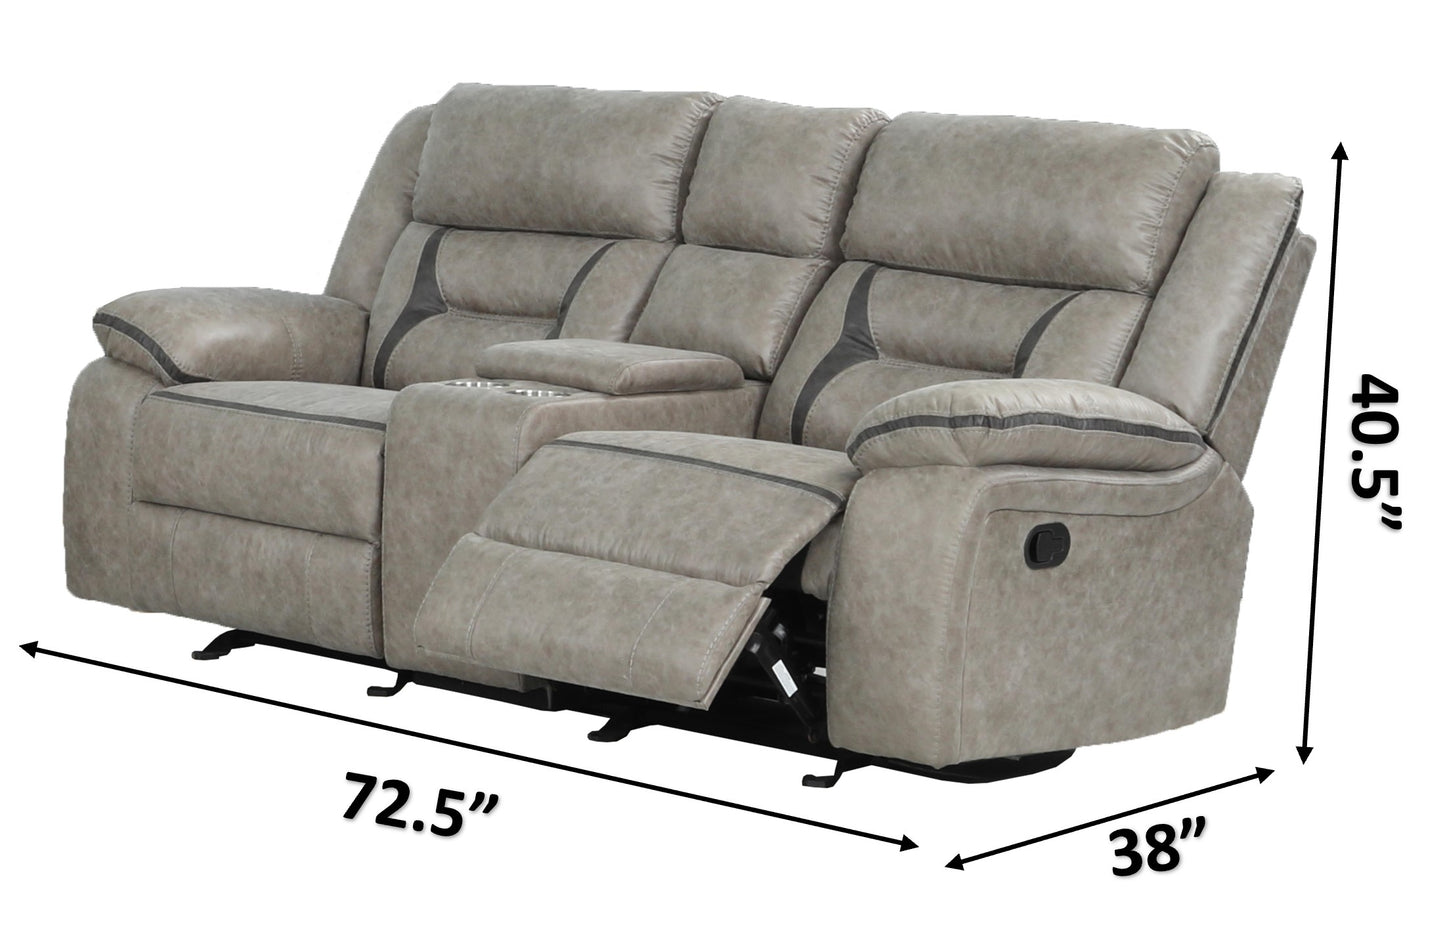 Denali Reclining 3PC sofa set with, Glider Reclining LoveSeat made with high performance fabric including inbuilt USB